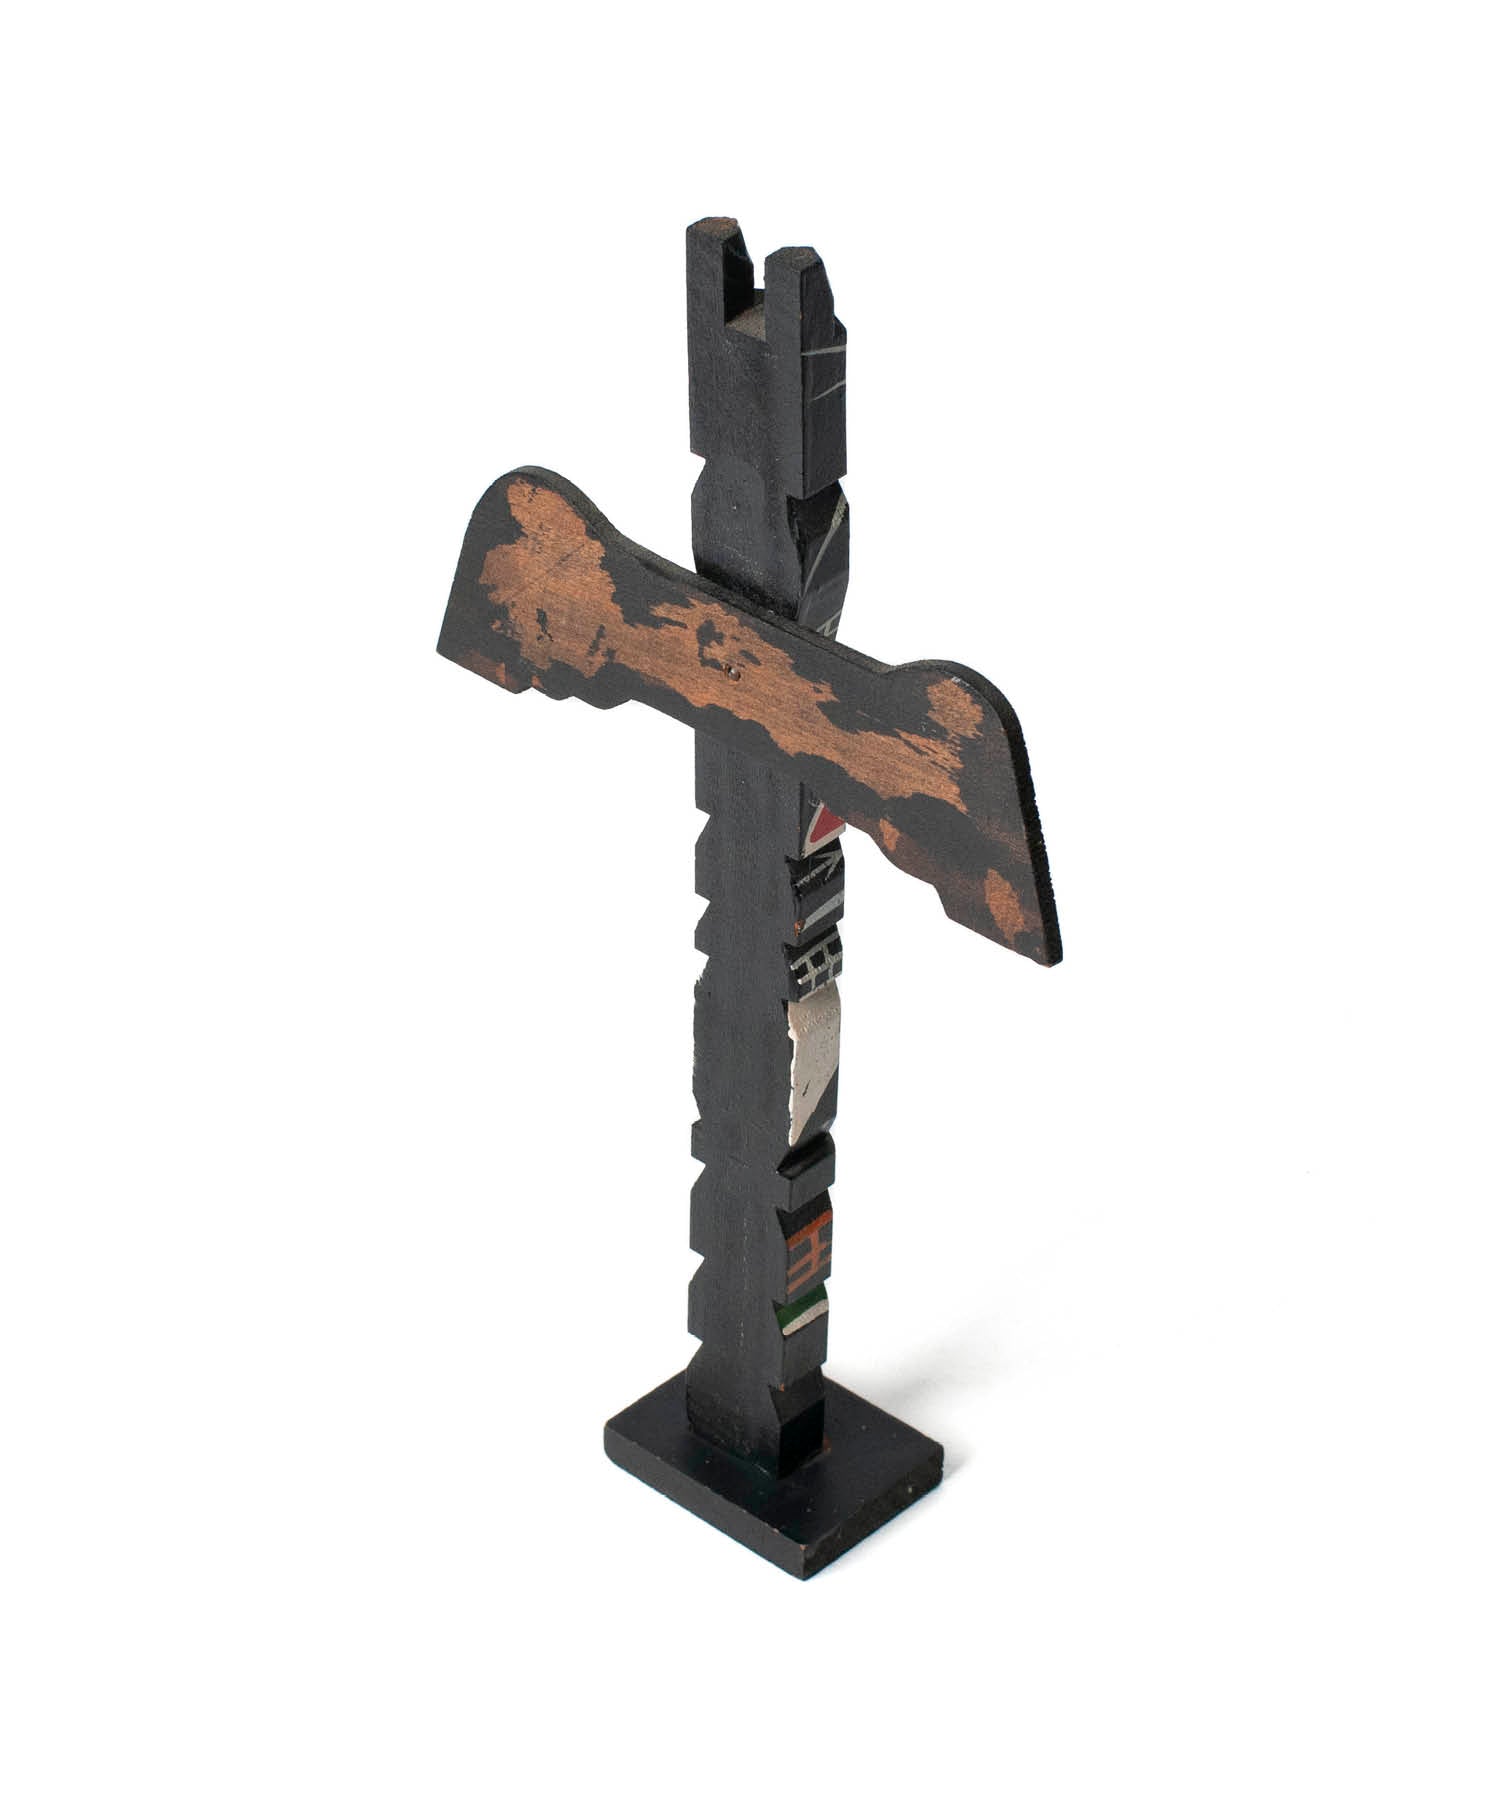 Vintage Object : Canadian Totem Pole | LIKE THIS SHOP